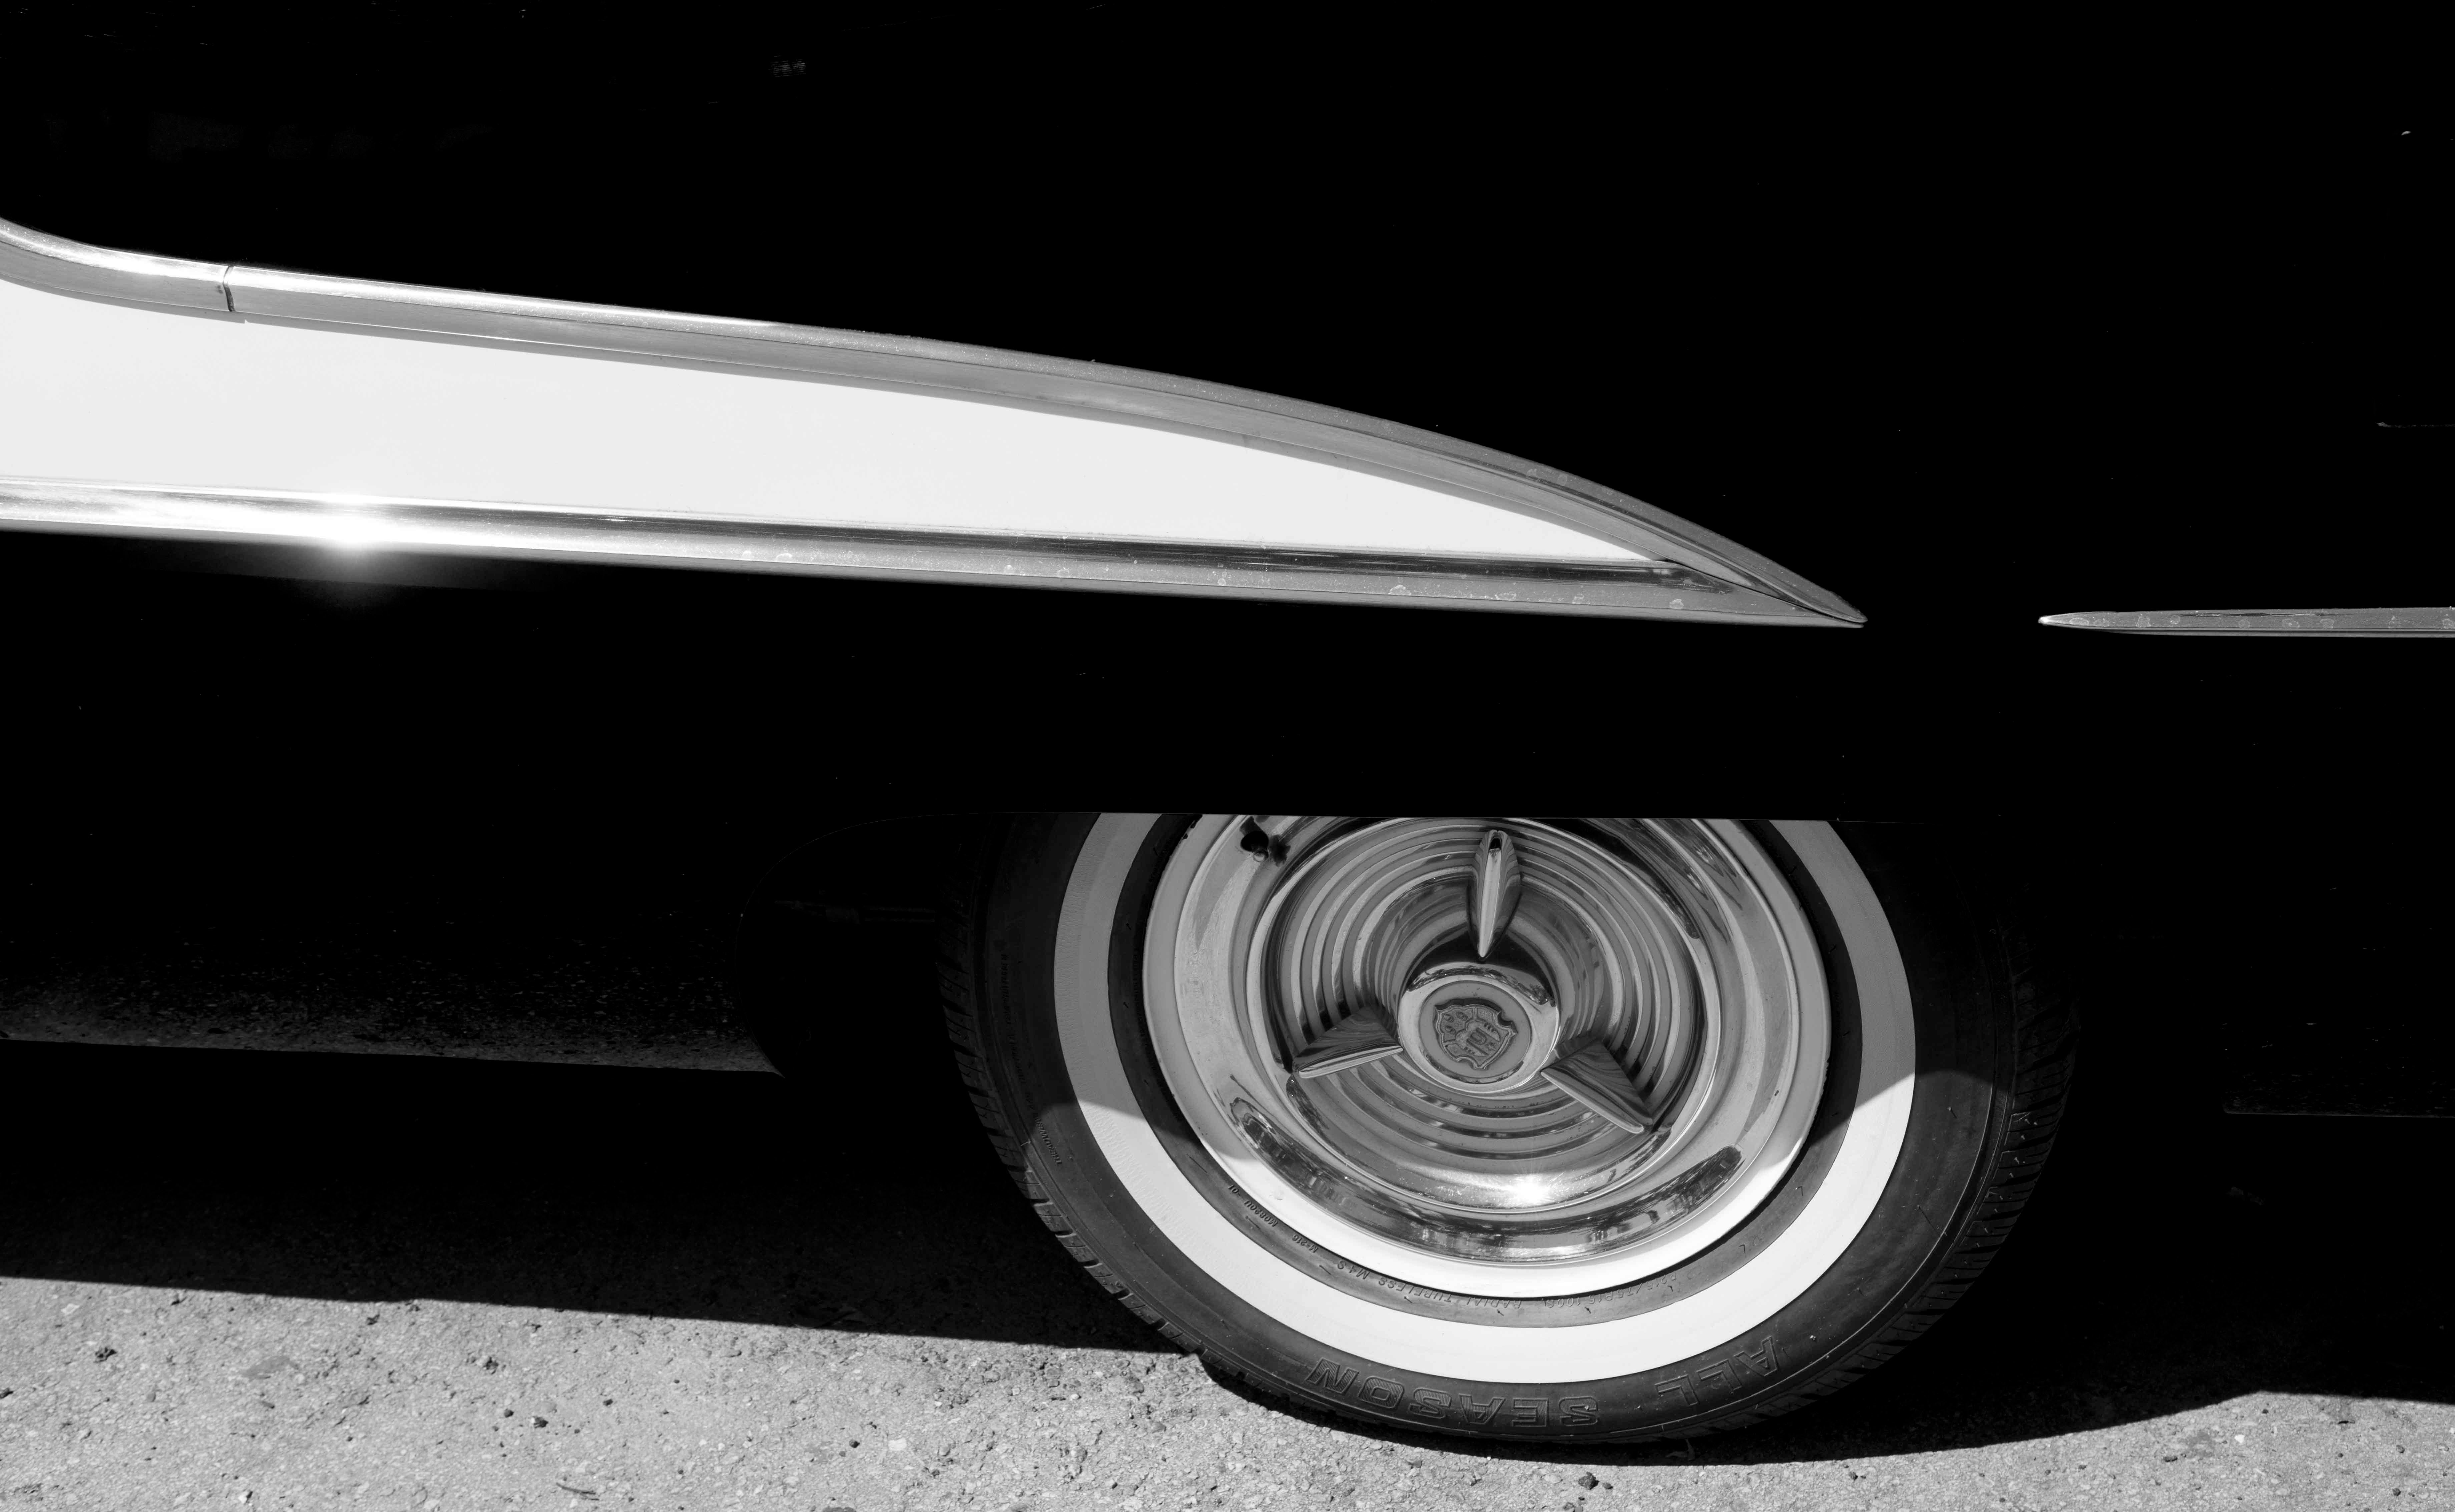 Old Cars Miami. Black and White  Still life limited editionPhotography